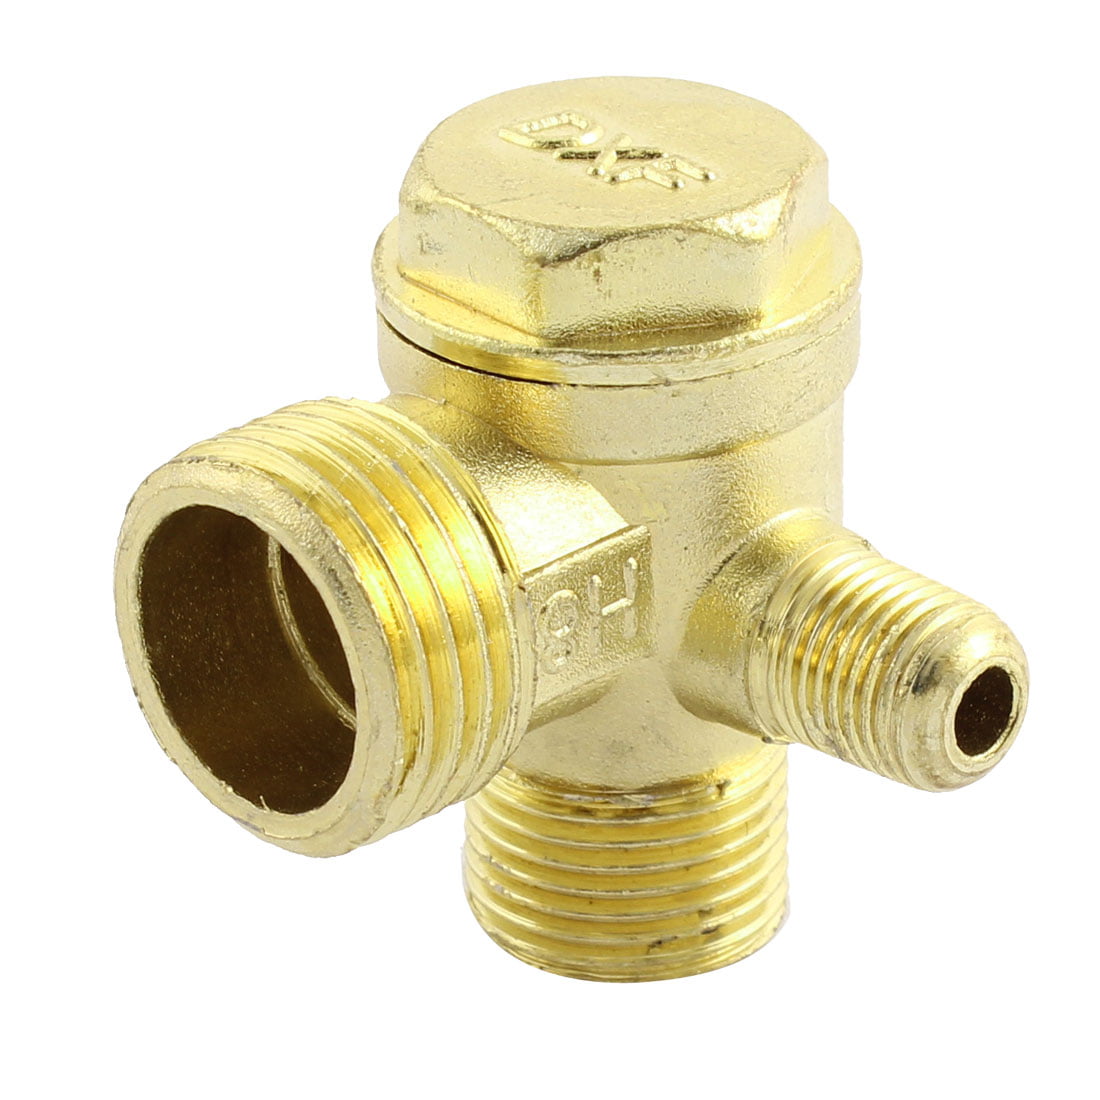 WUXUN-Valve 3 Port Brass Male Threaded Check Valve Connector Tool for Air Compressor Prevent Water Backflow